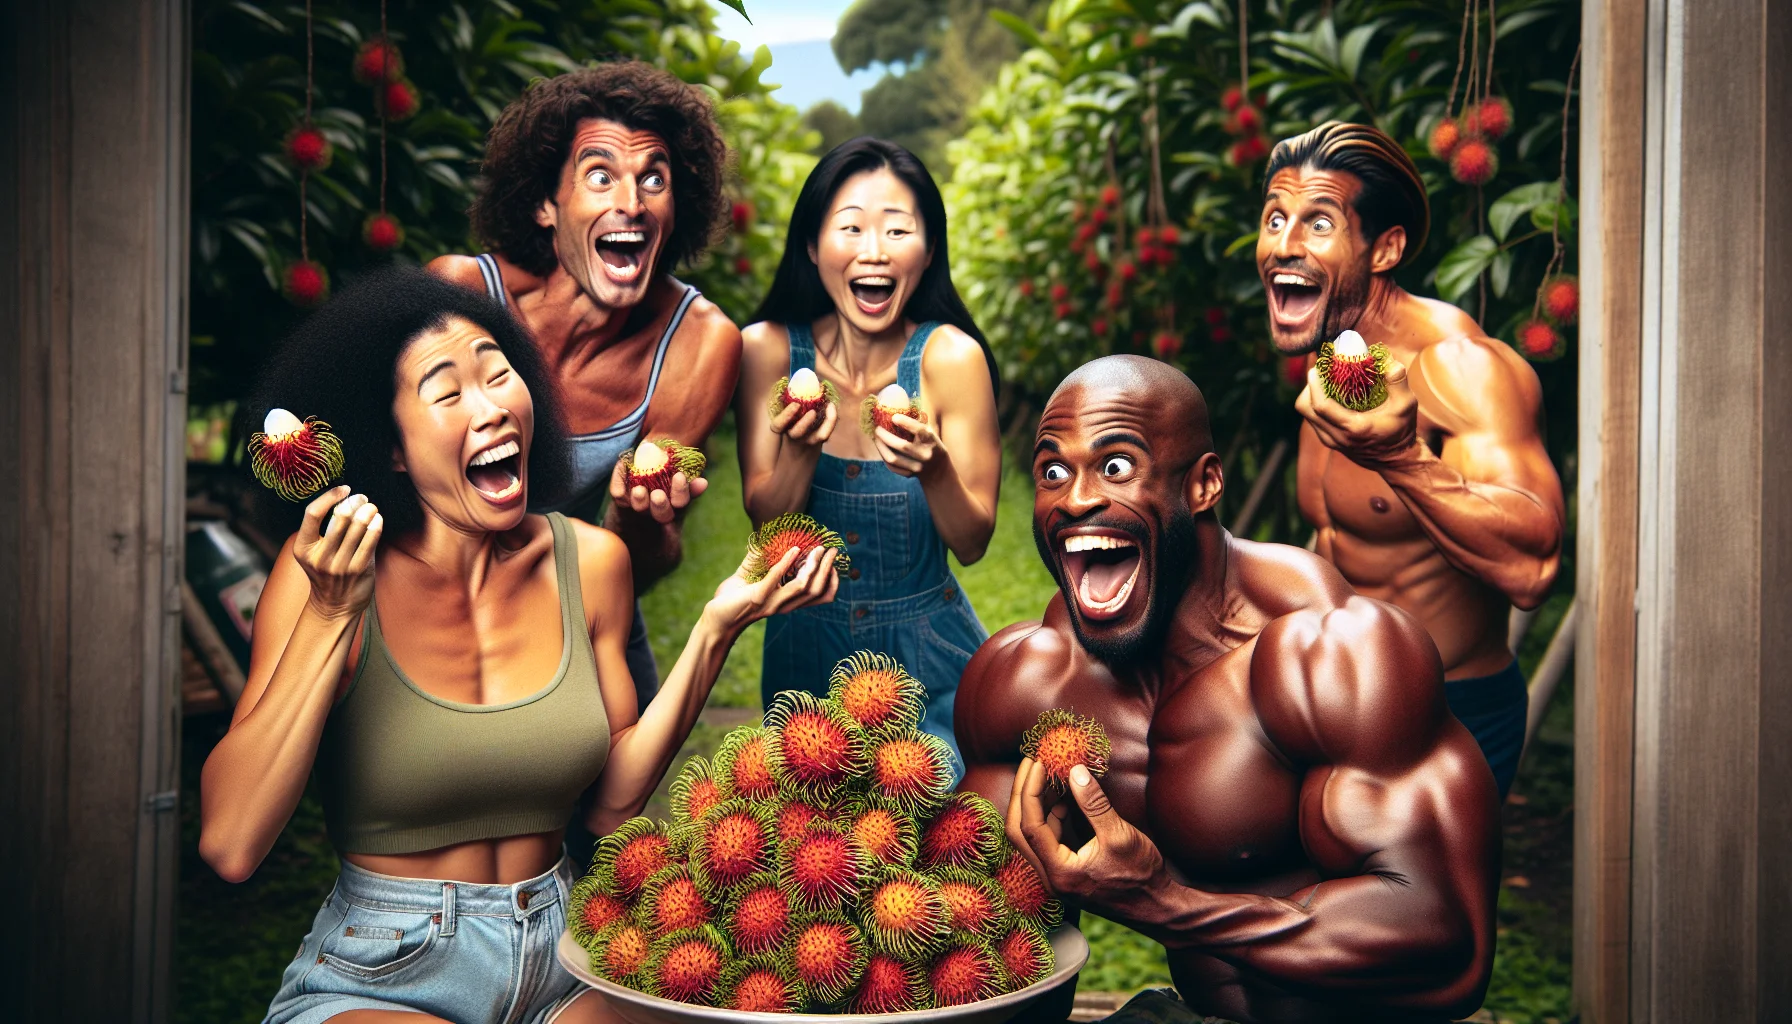 A humorously enchanting scenario outdoors, where a dynamic group of people are joyfully engaging in gardening activities. A medium-height Caucasian woman is laughing while biting into a rambutan, exaggerating the juicy squirt. A muscular South Asian muscular man is beaming while holding a freshly plucked rambutan, feigning shock at its taste. Their friends, a Black woman with a tall physique and a shorter Hispanic man, are captivated by their reactions and eagerly reaching for their own rambutans with delight. This image captures the amusing juxtaposition of the unfamiliar, exotic taste of rambutan and the familiar, soothing environment of a garden.